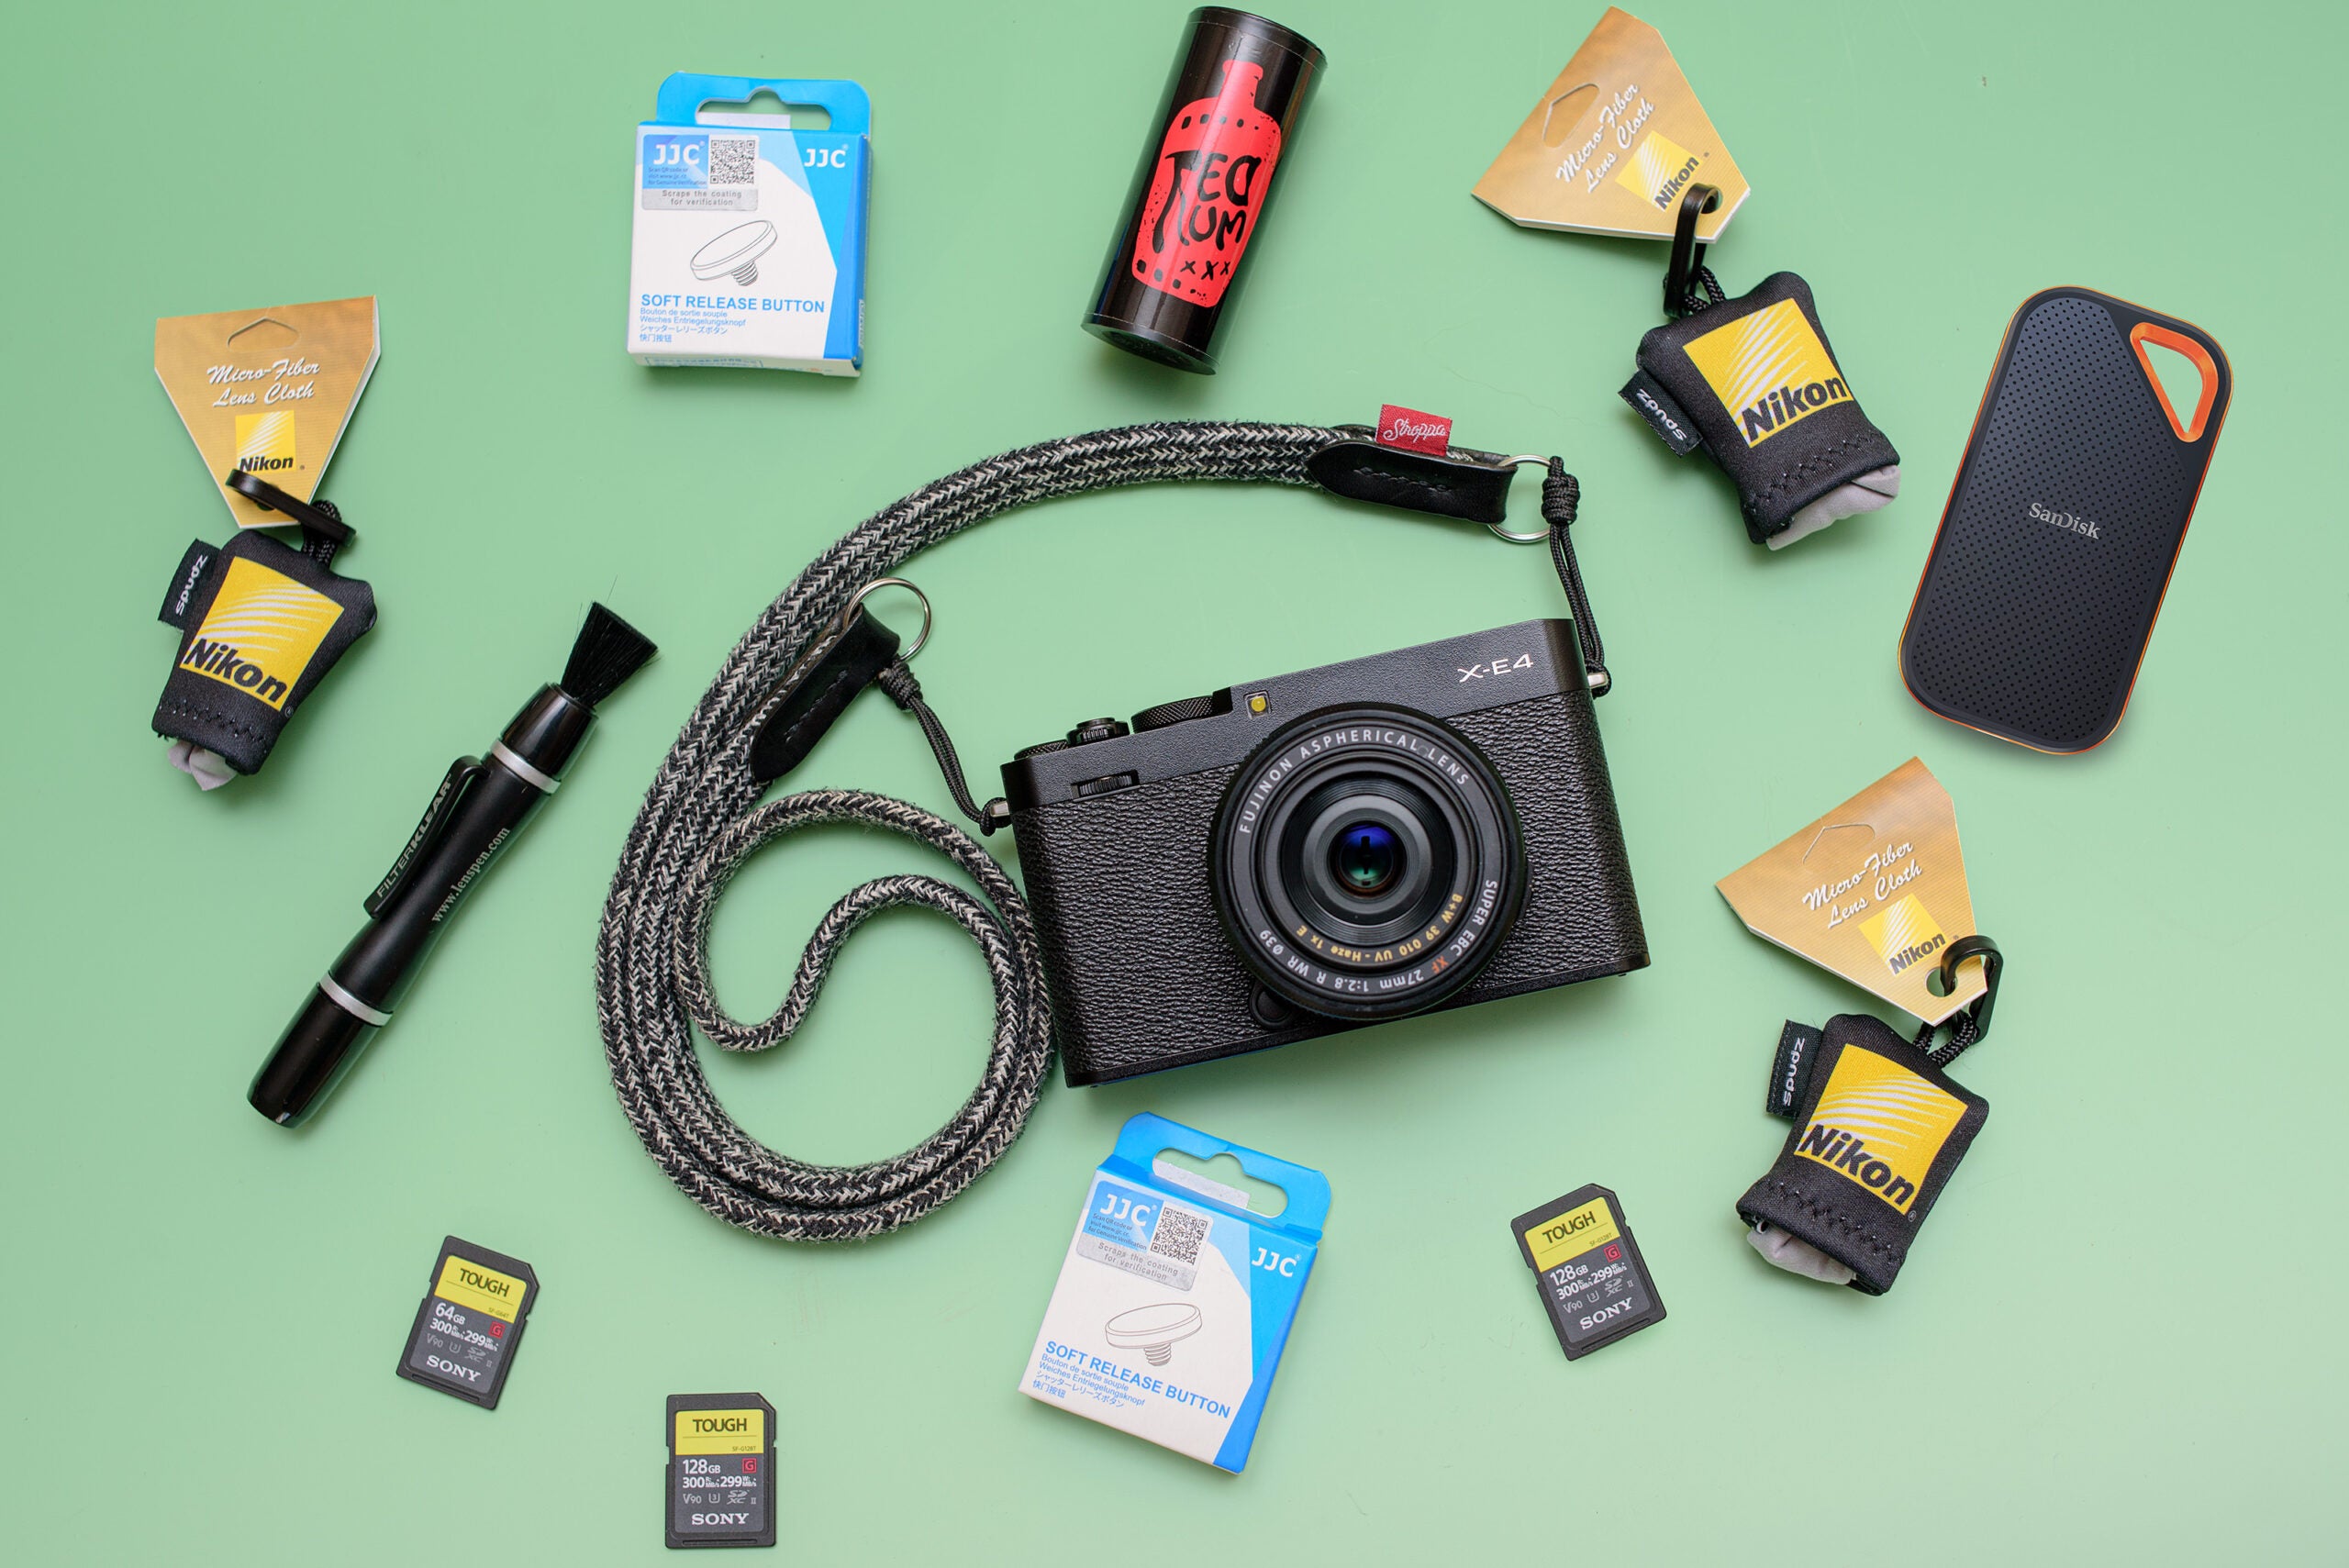 Best gifts for photographers in 2021